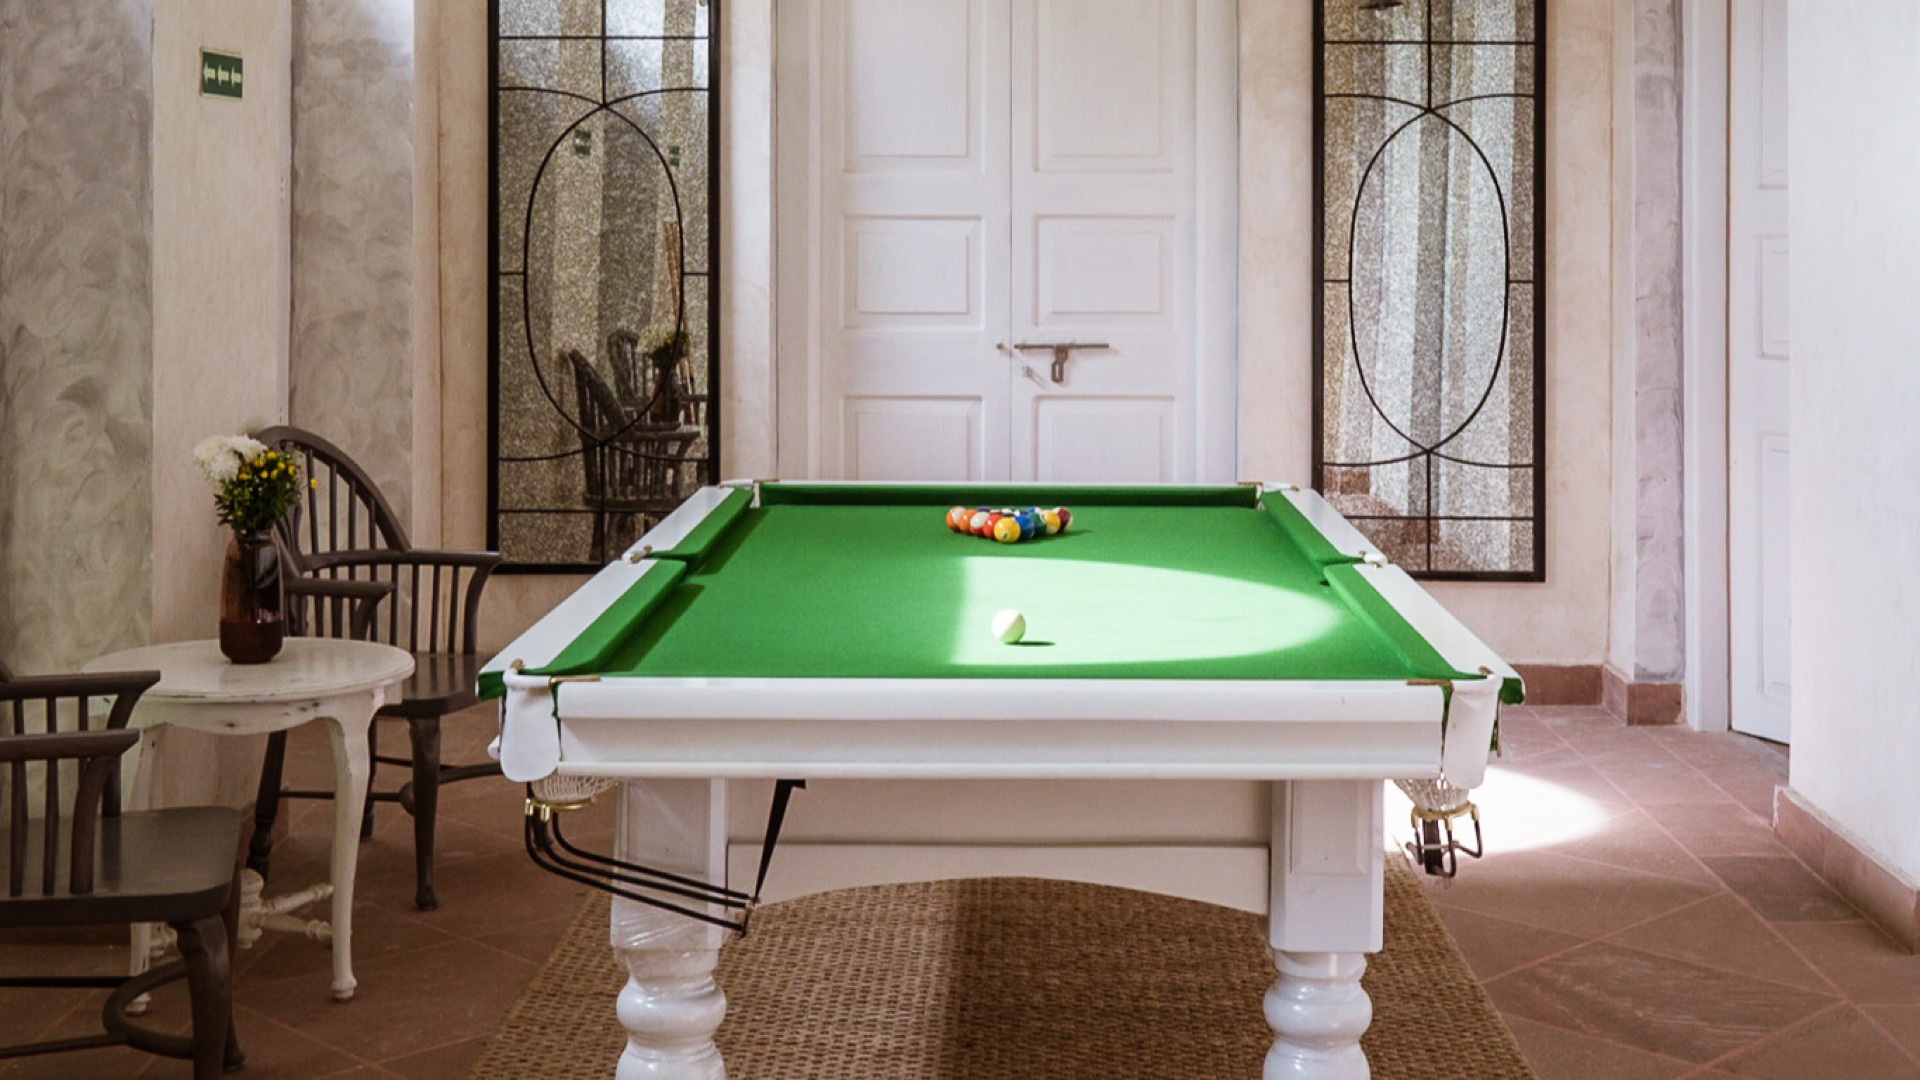 Interior of the antique pool table in The Denmark Club